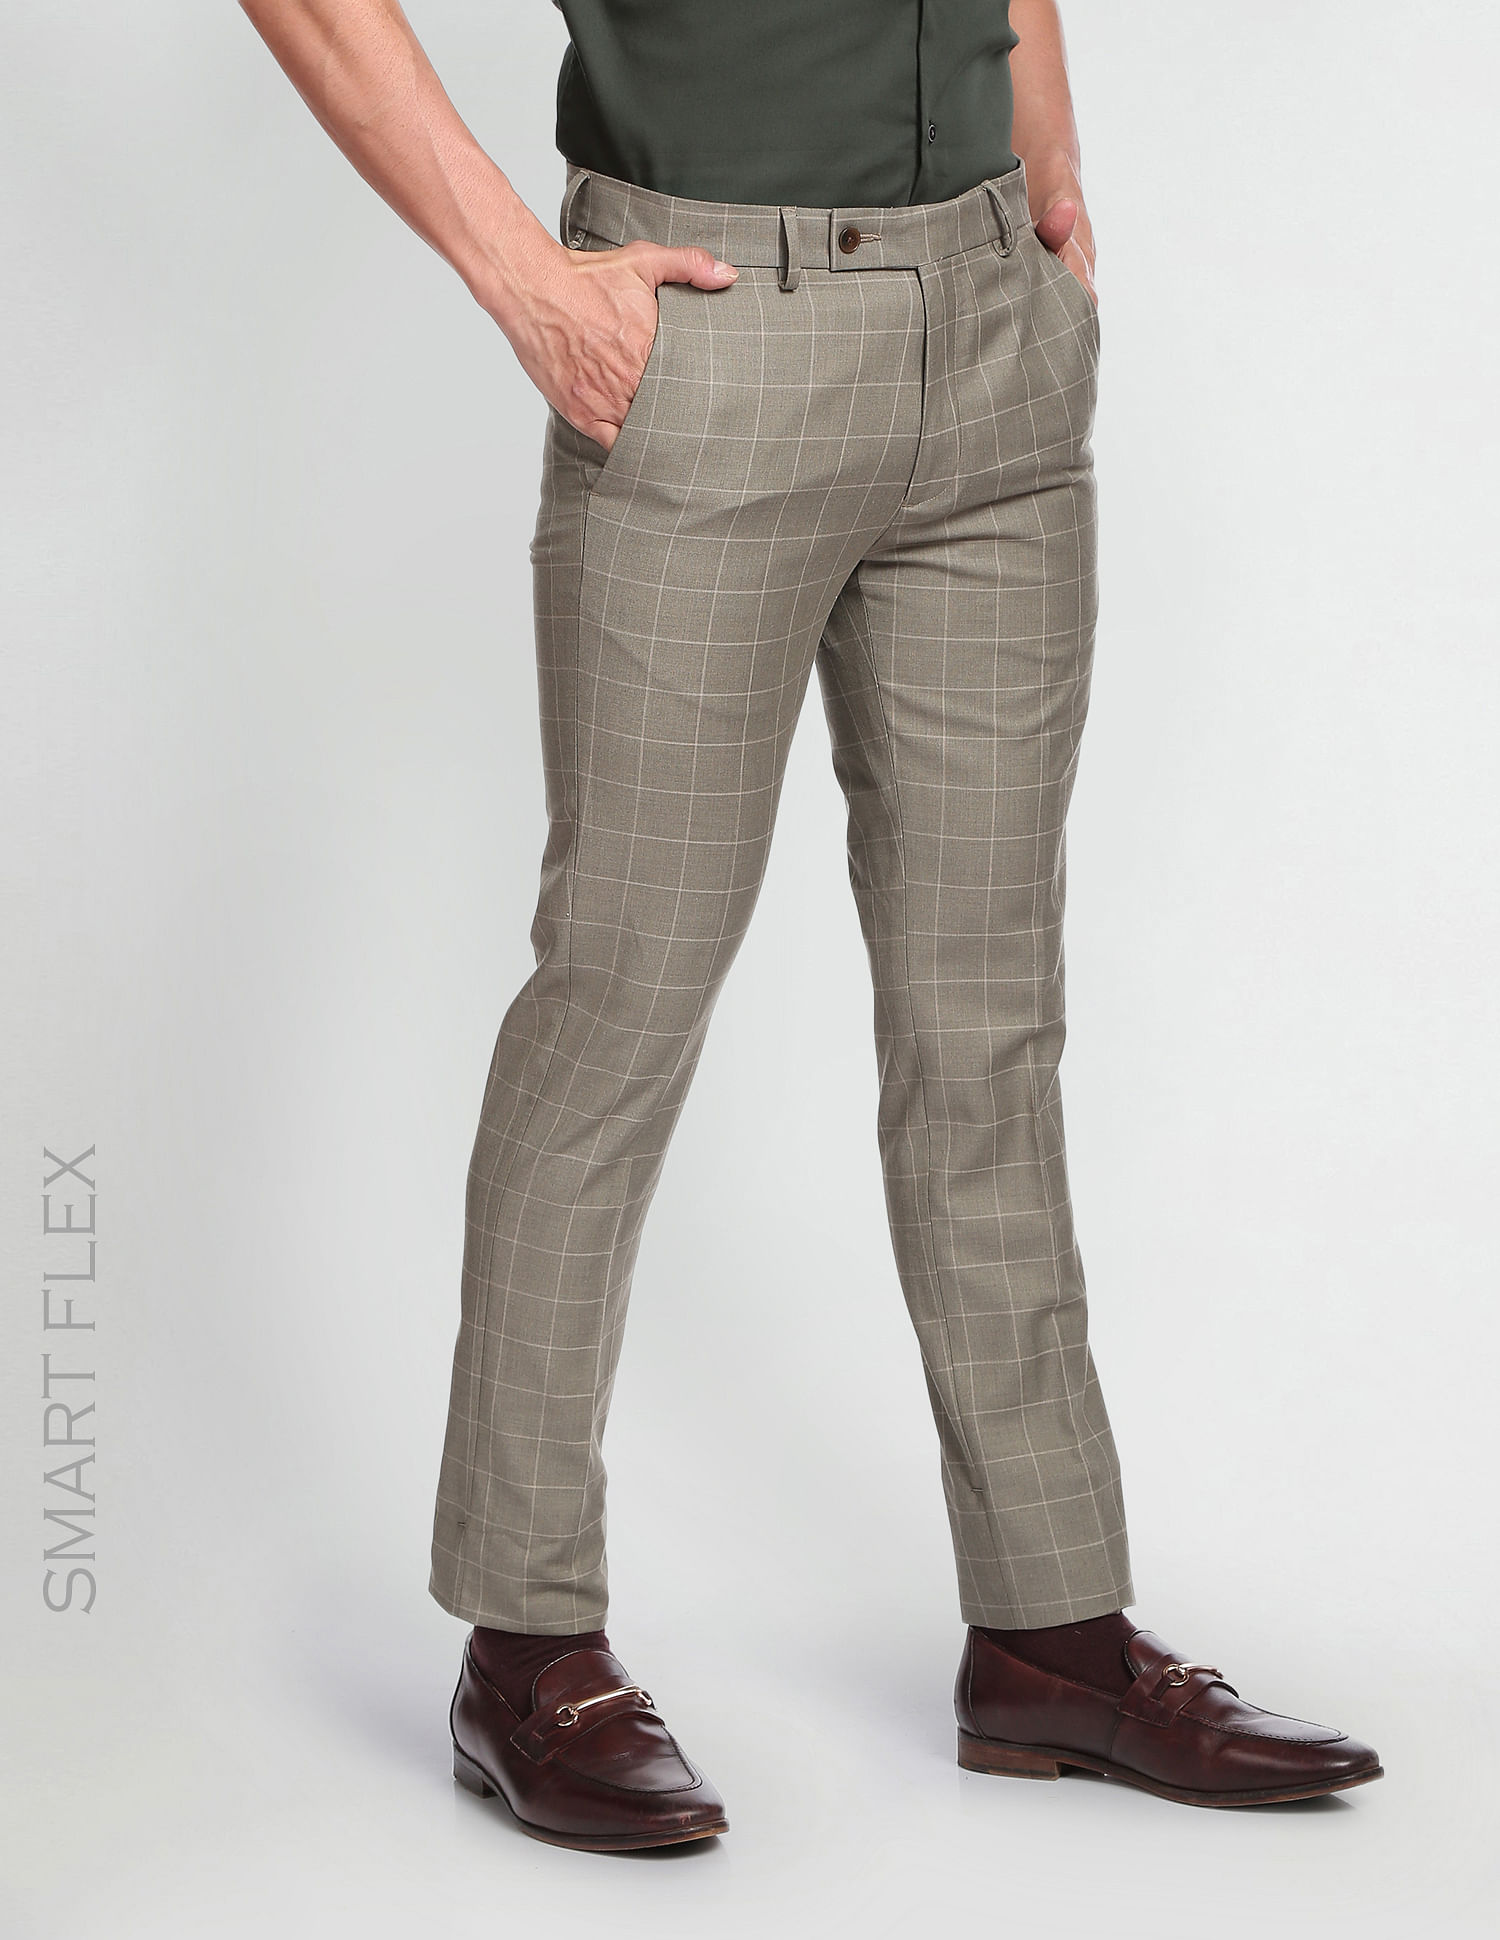 Shop Gintto Men's Grey Check Trousers – GINGTTO